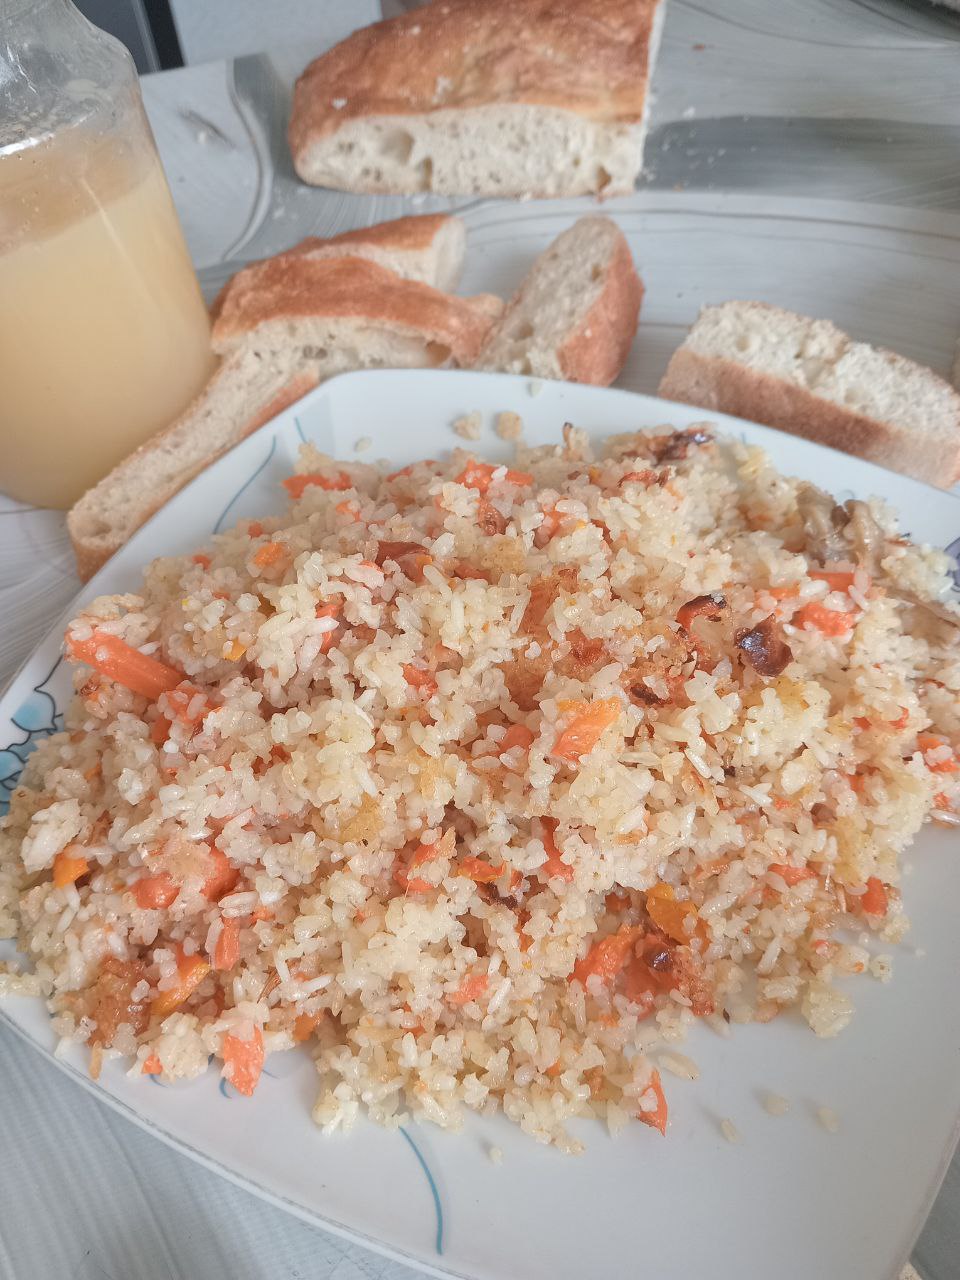 plate of plov (Central Asian fried rice dish with carrots) on a table